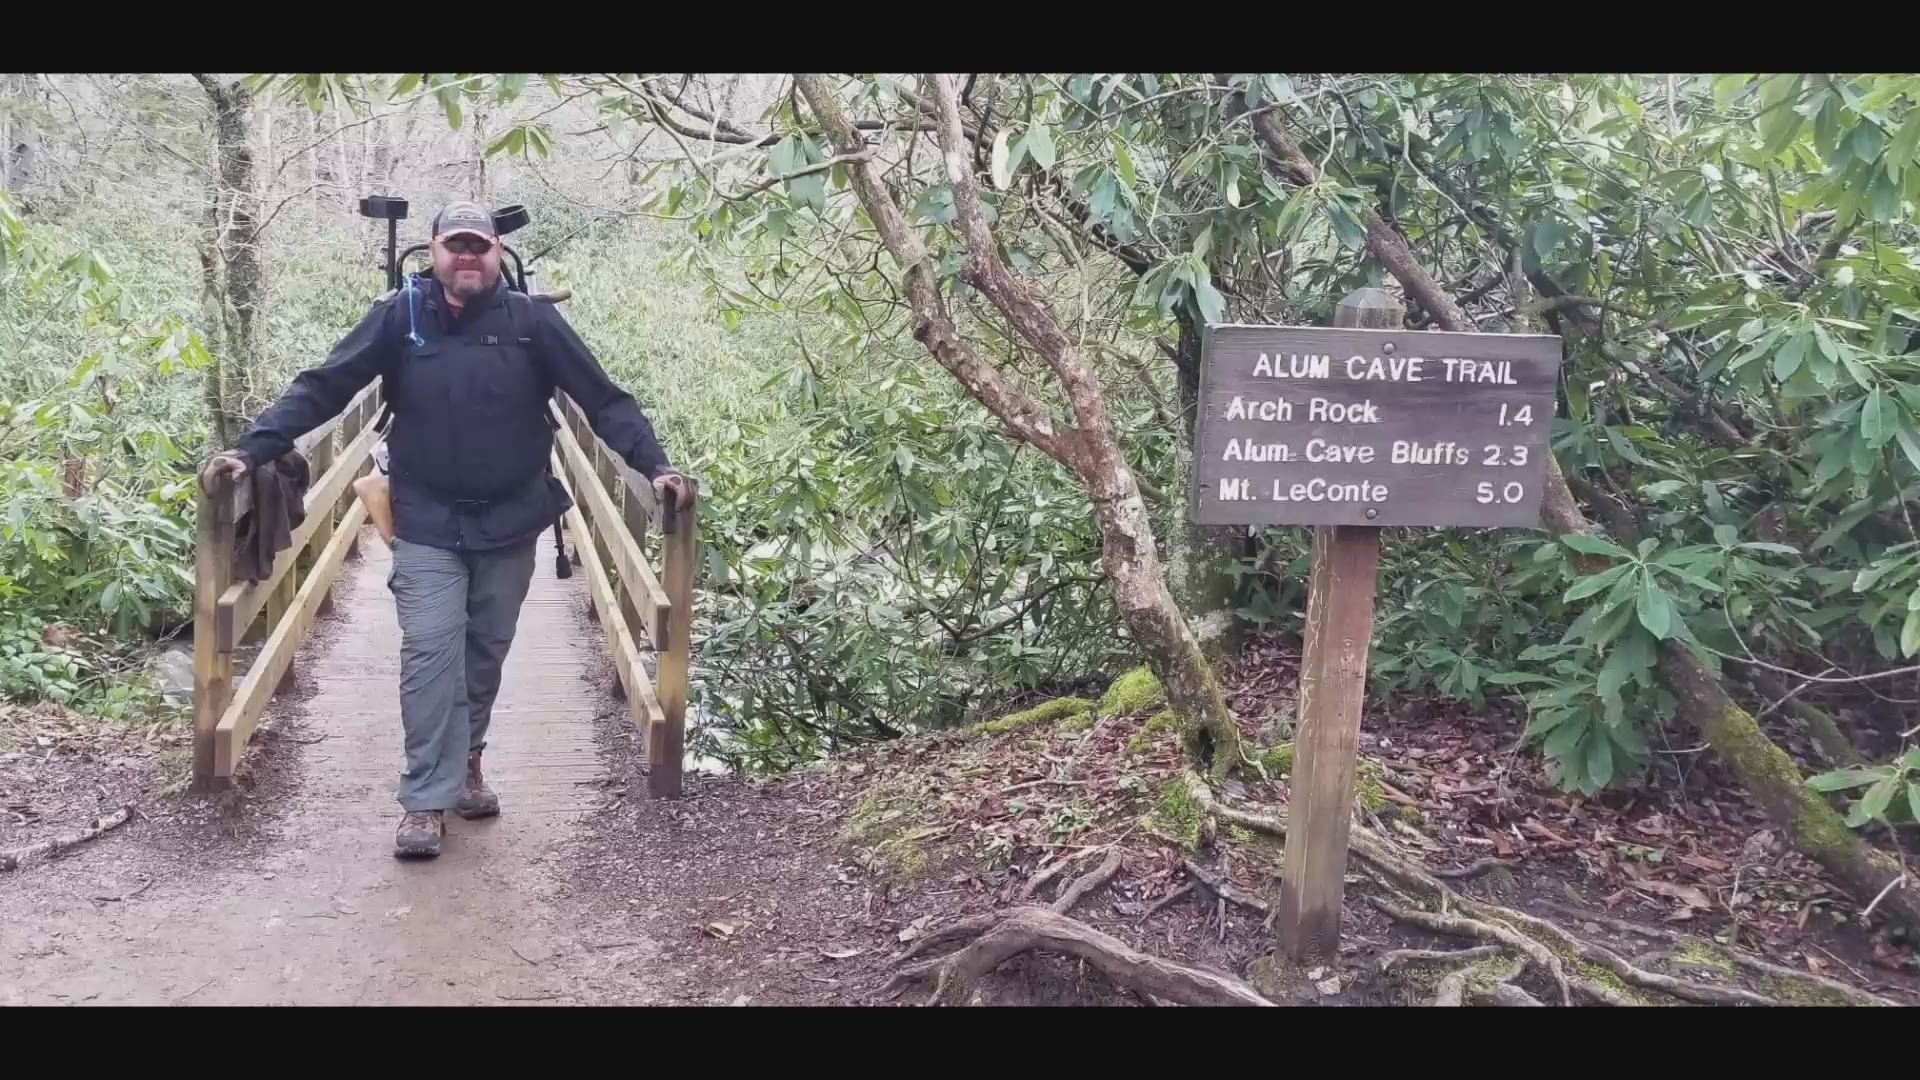 In a story of determination, Daniel Bice made it to the top of Mt. LeConte.